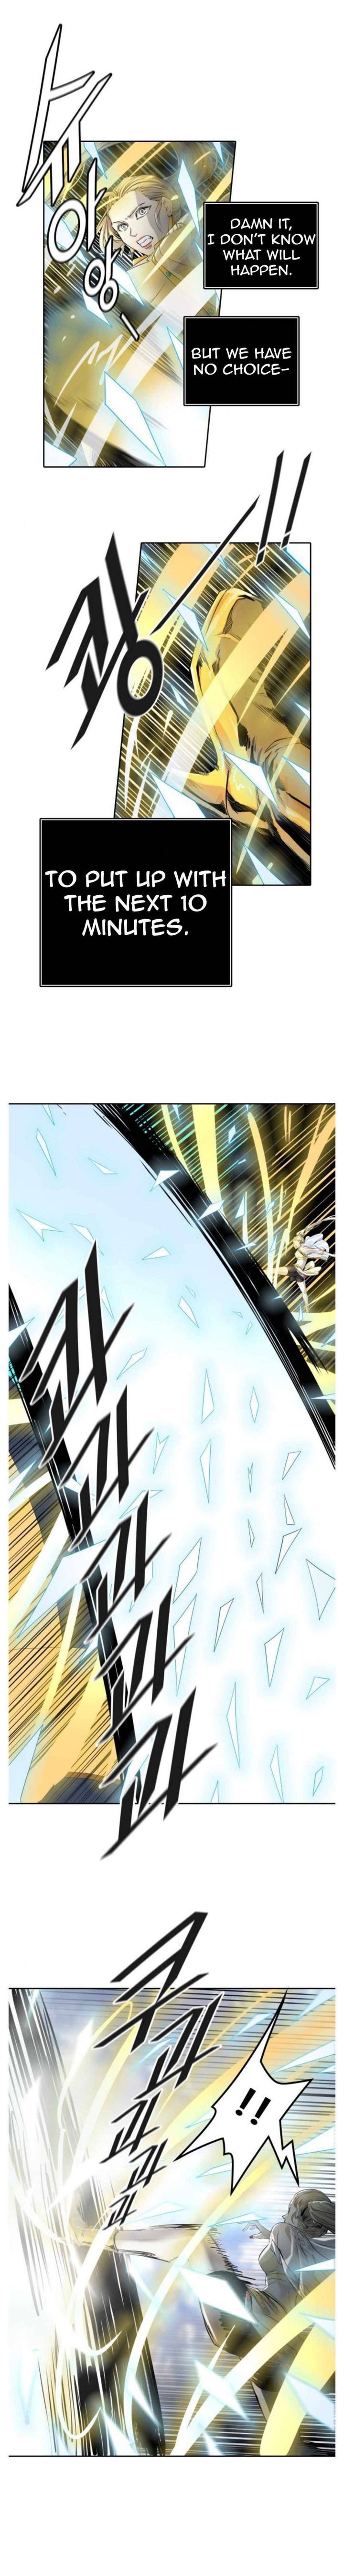 Tower Of God 496 4